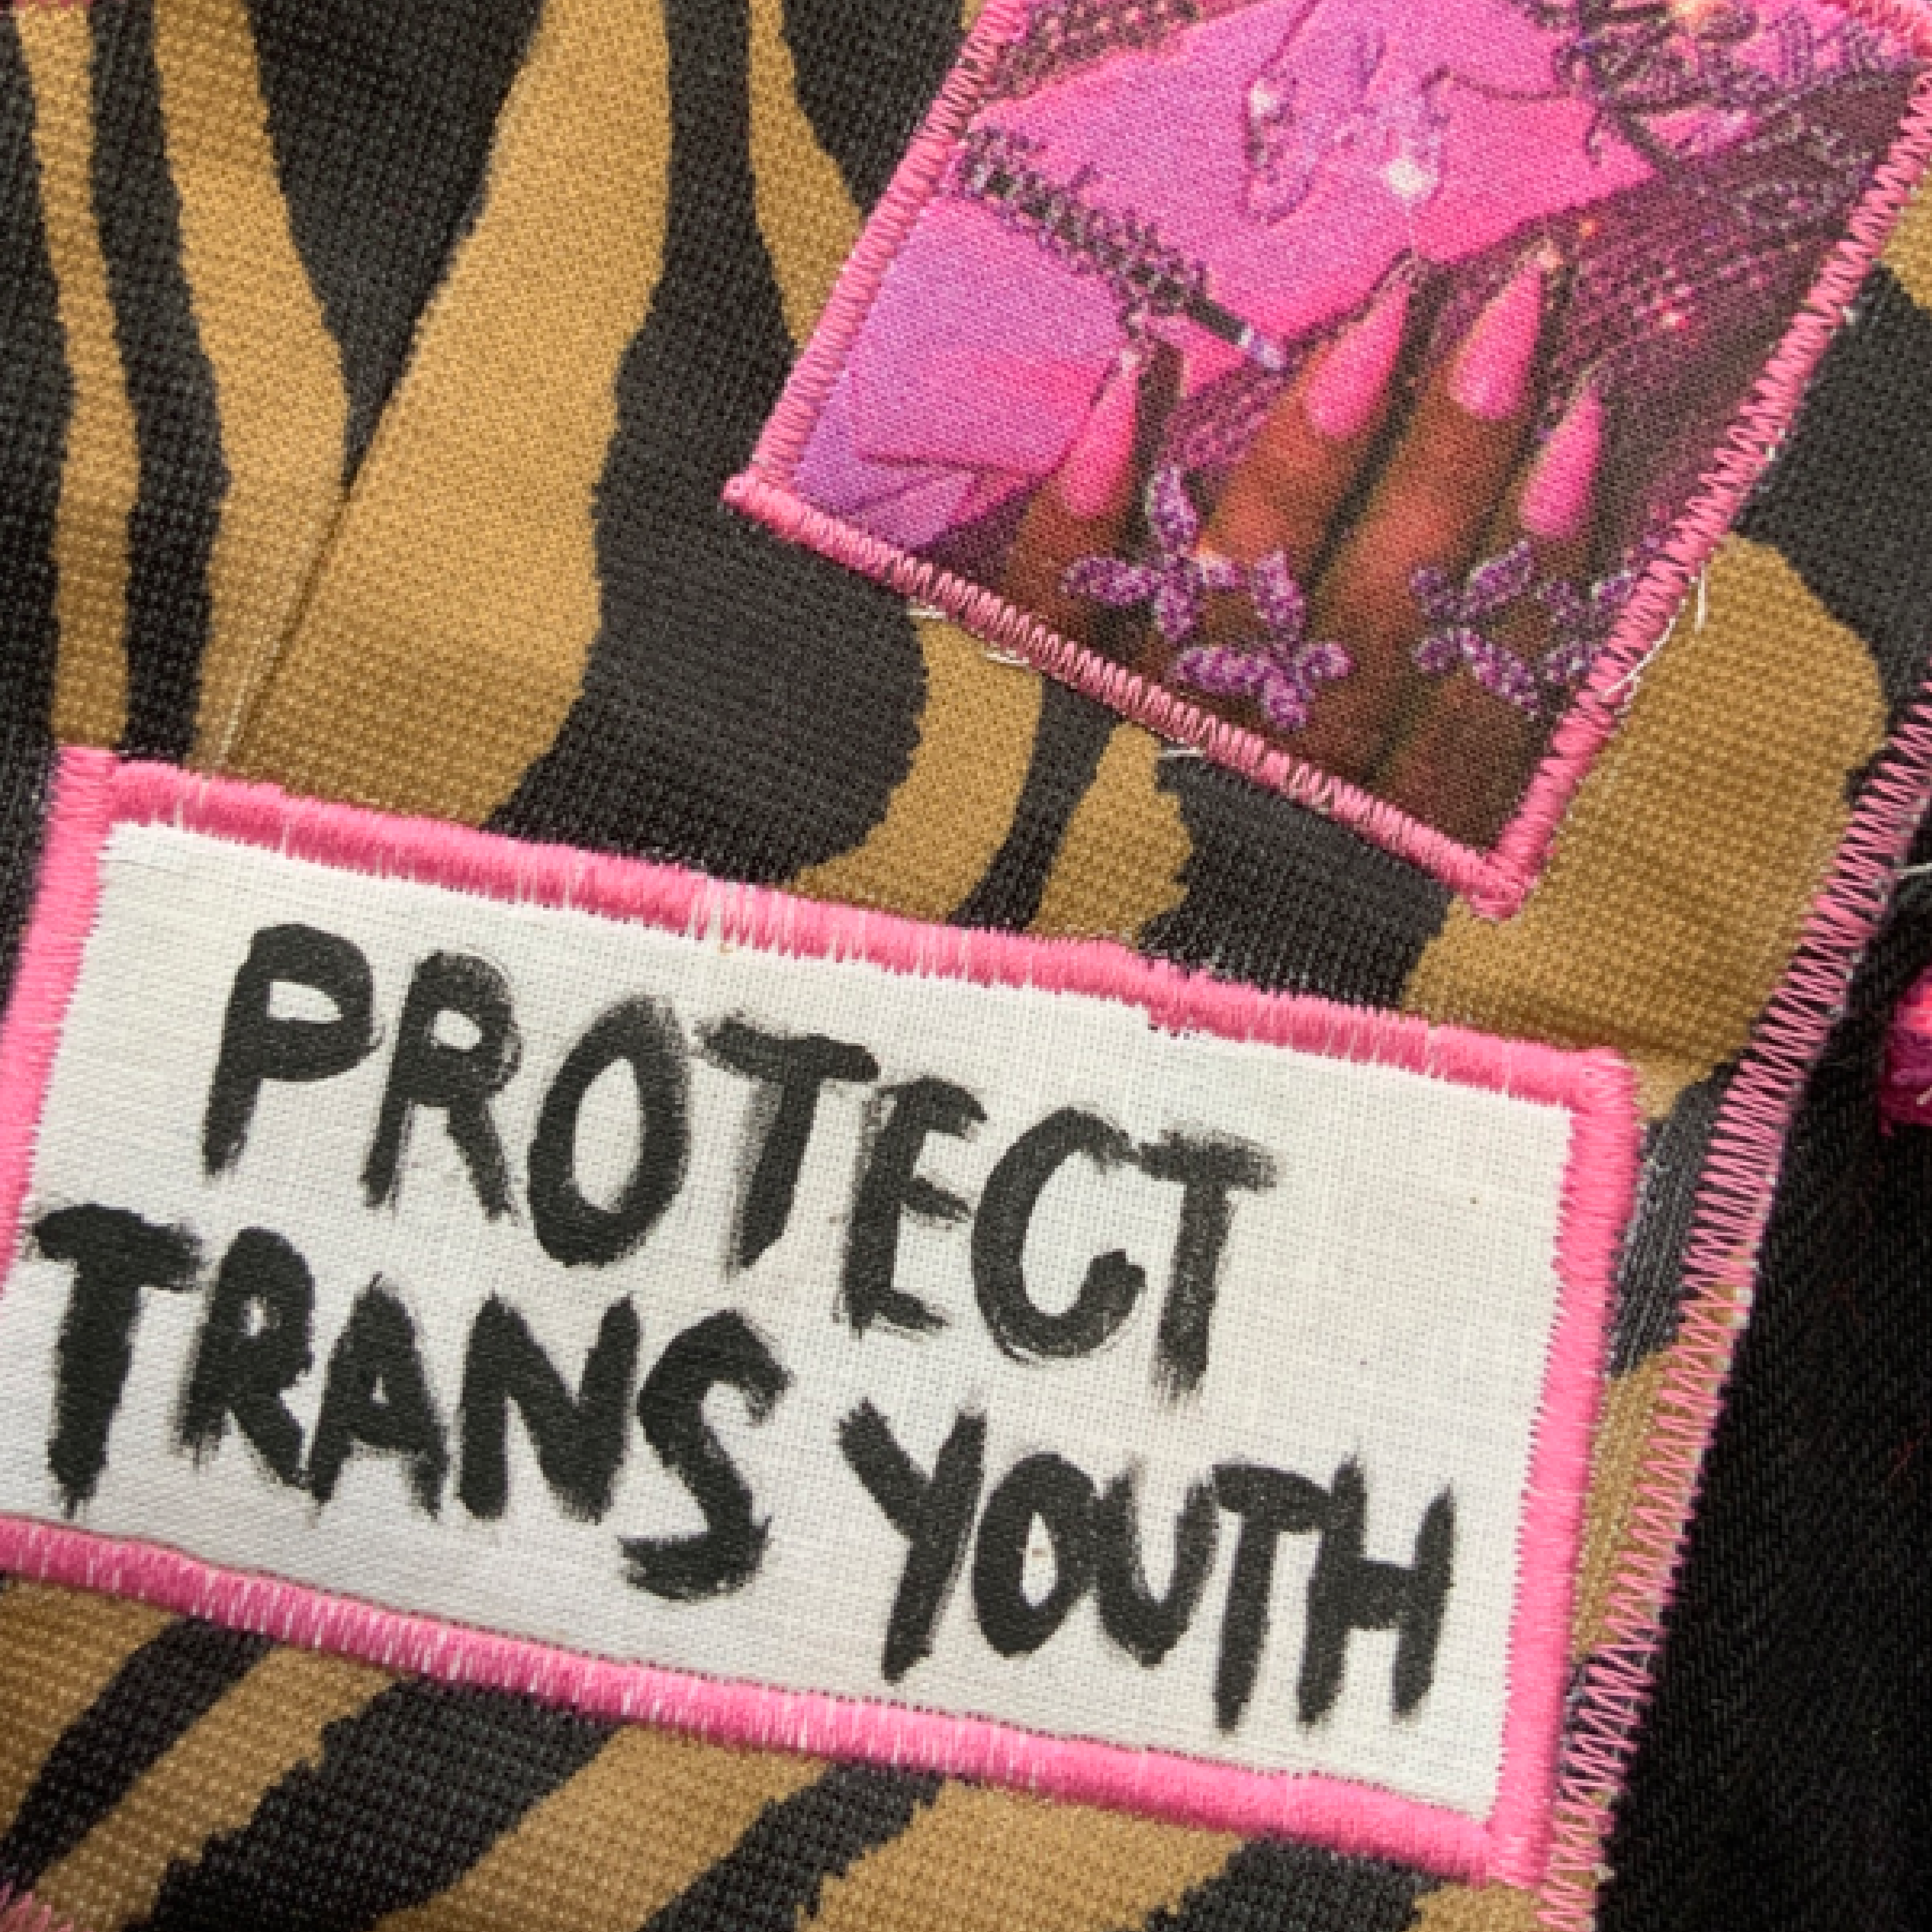 Protect Trans Youth reworked denim bodice crop - S